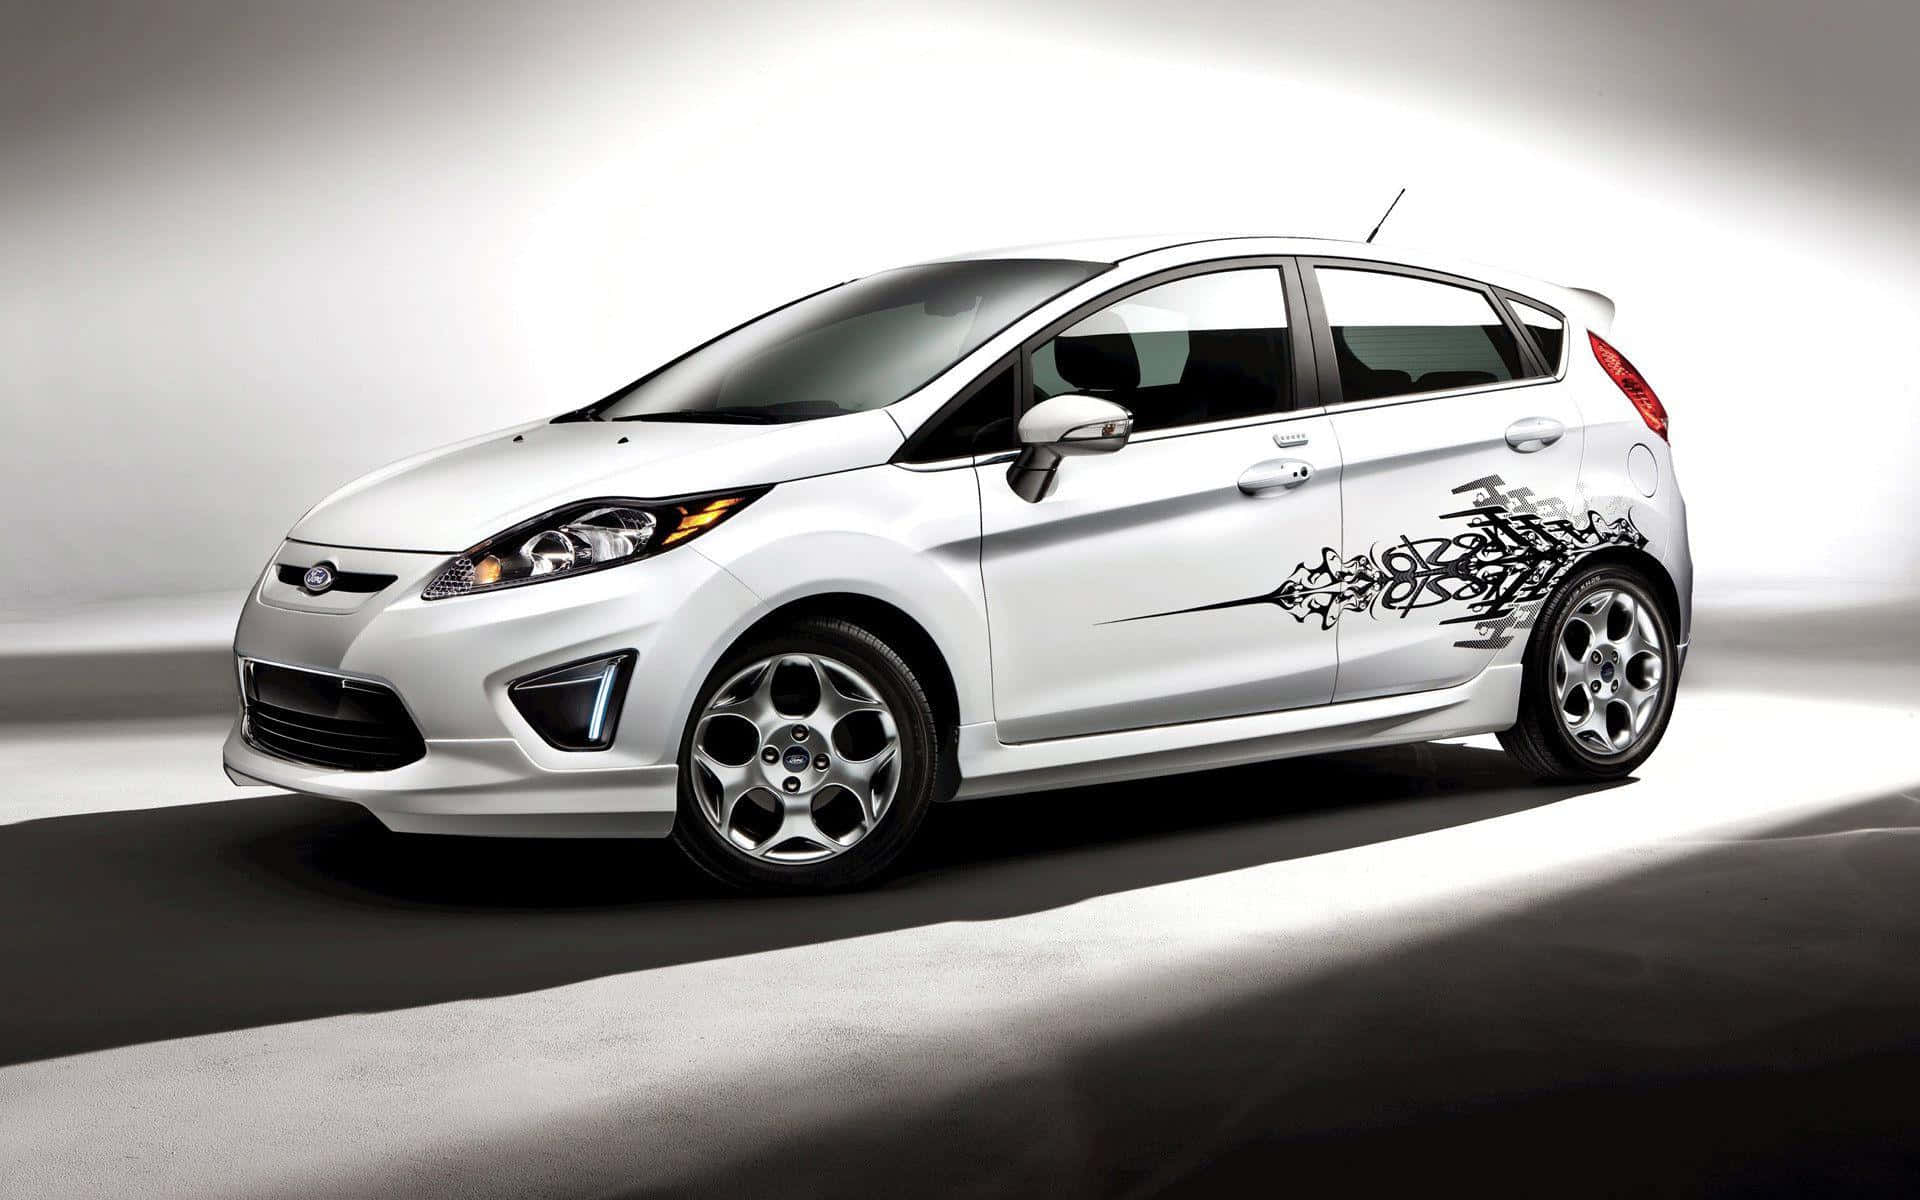 Sleek and Stylish Ford Fiesta in Action Wallpaper